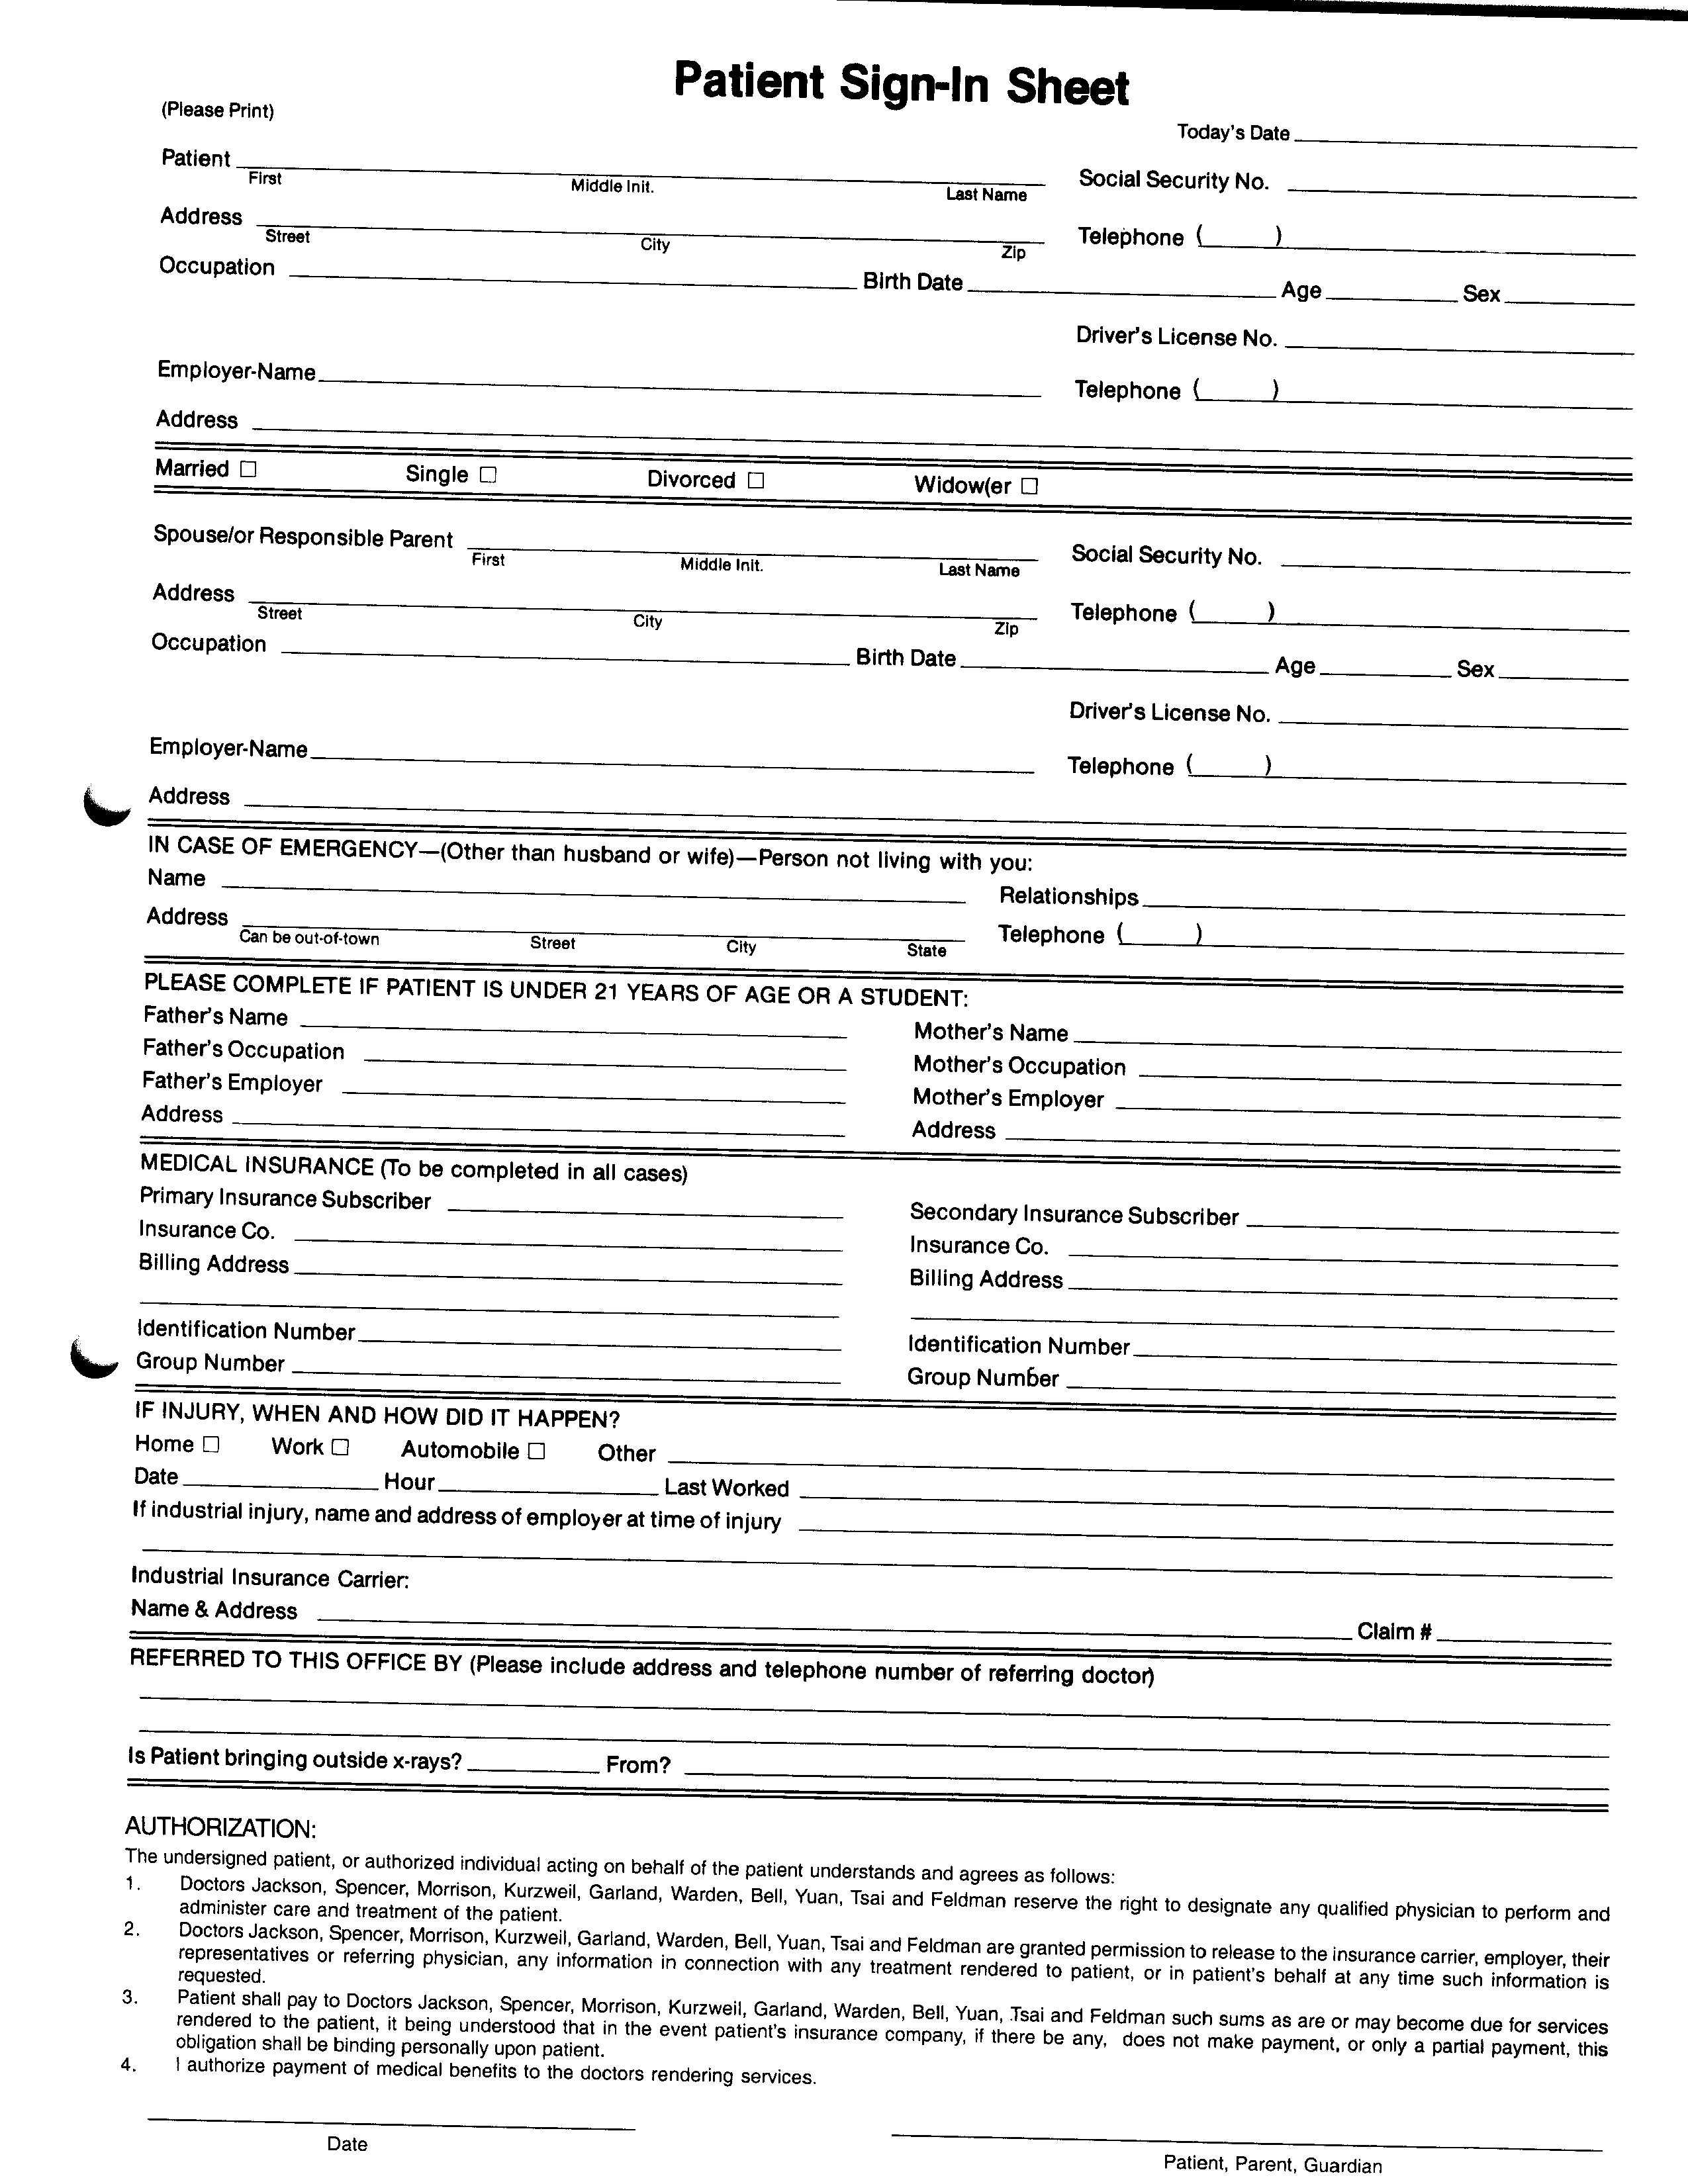 Patient Sign-in Sheet main image